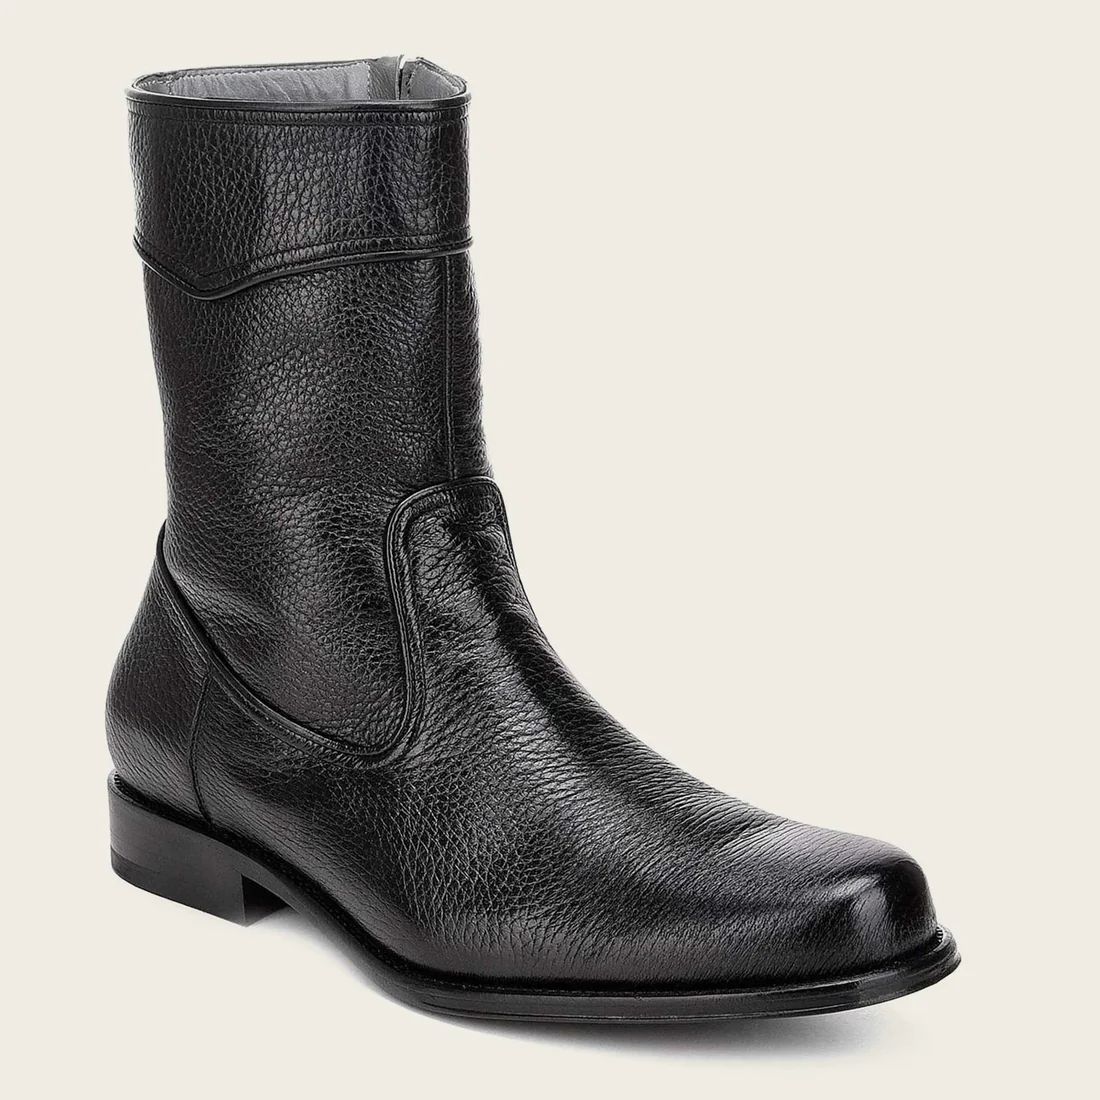 Cuadra | Hand-Painted Black Leather Boot With Bumped Rims